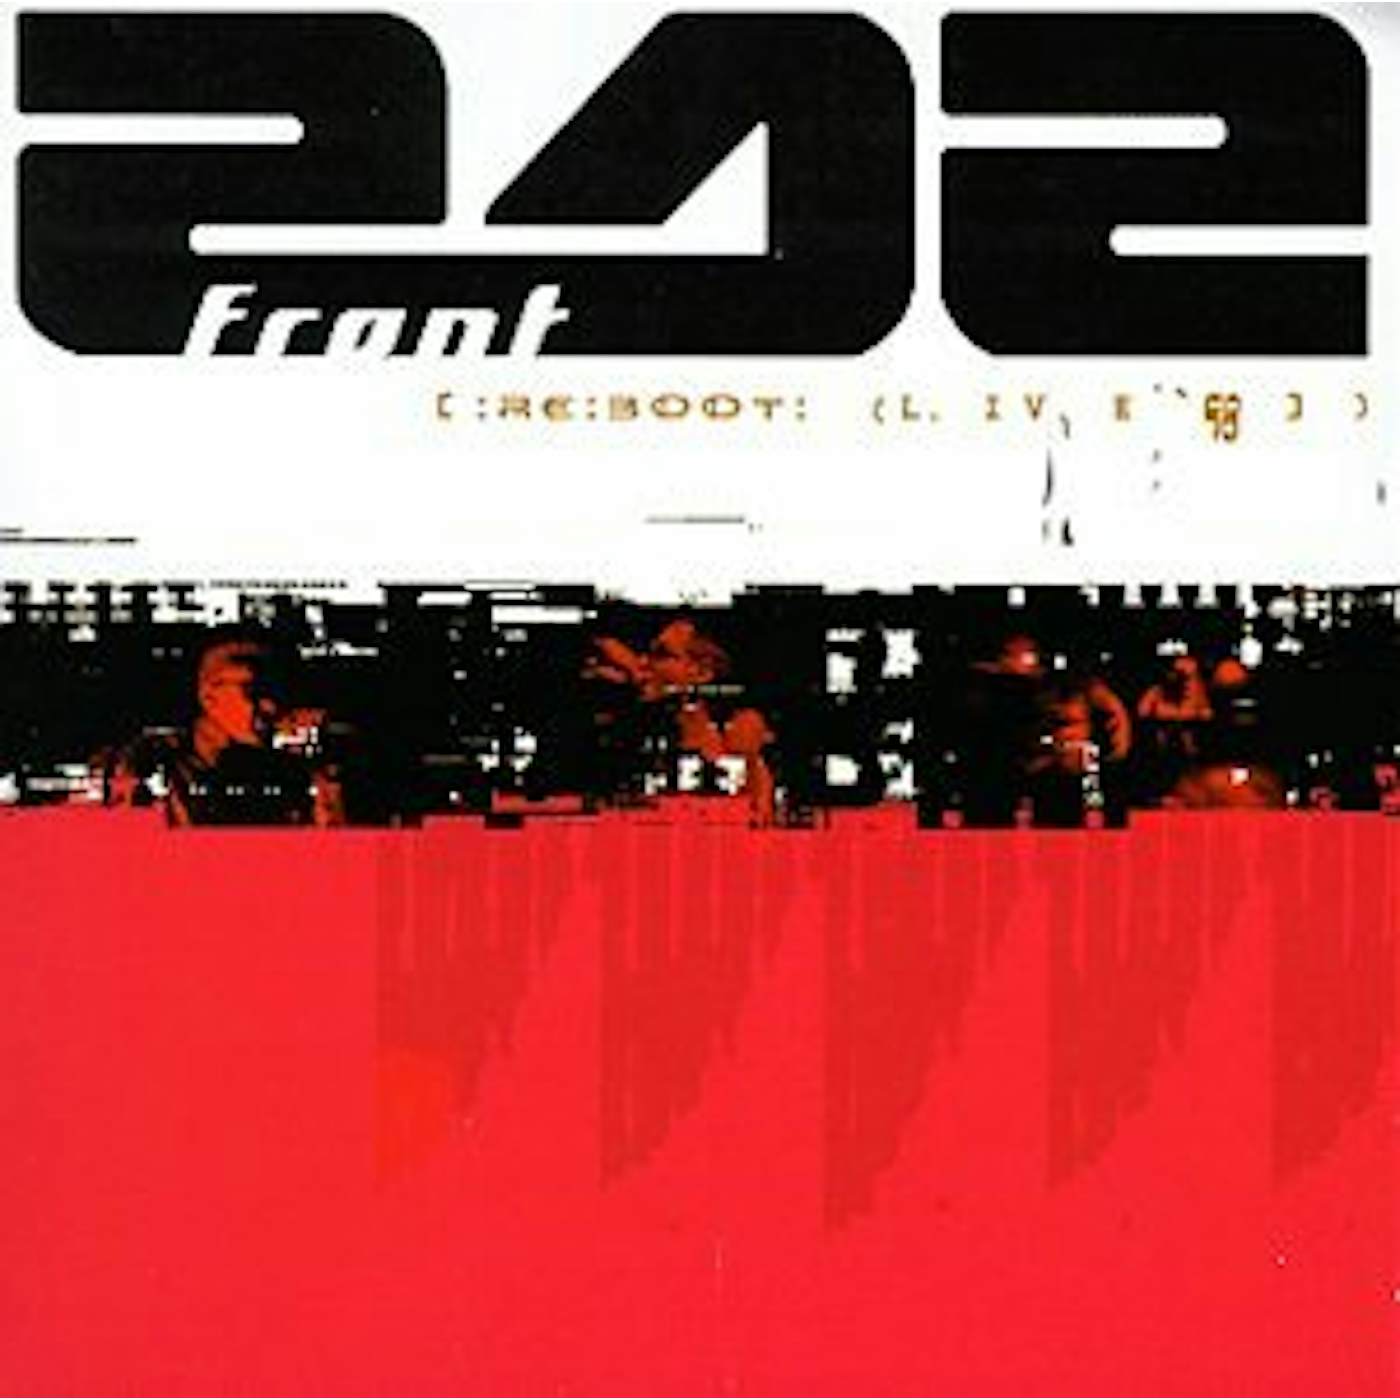 Front 242 RE:BOOT CD